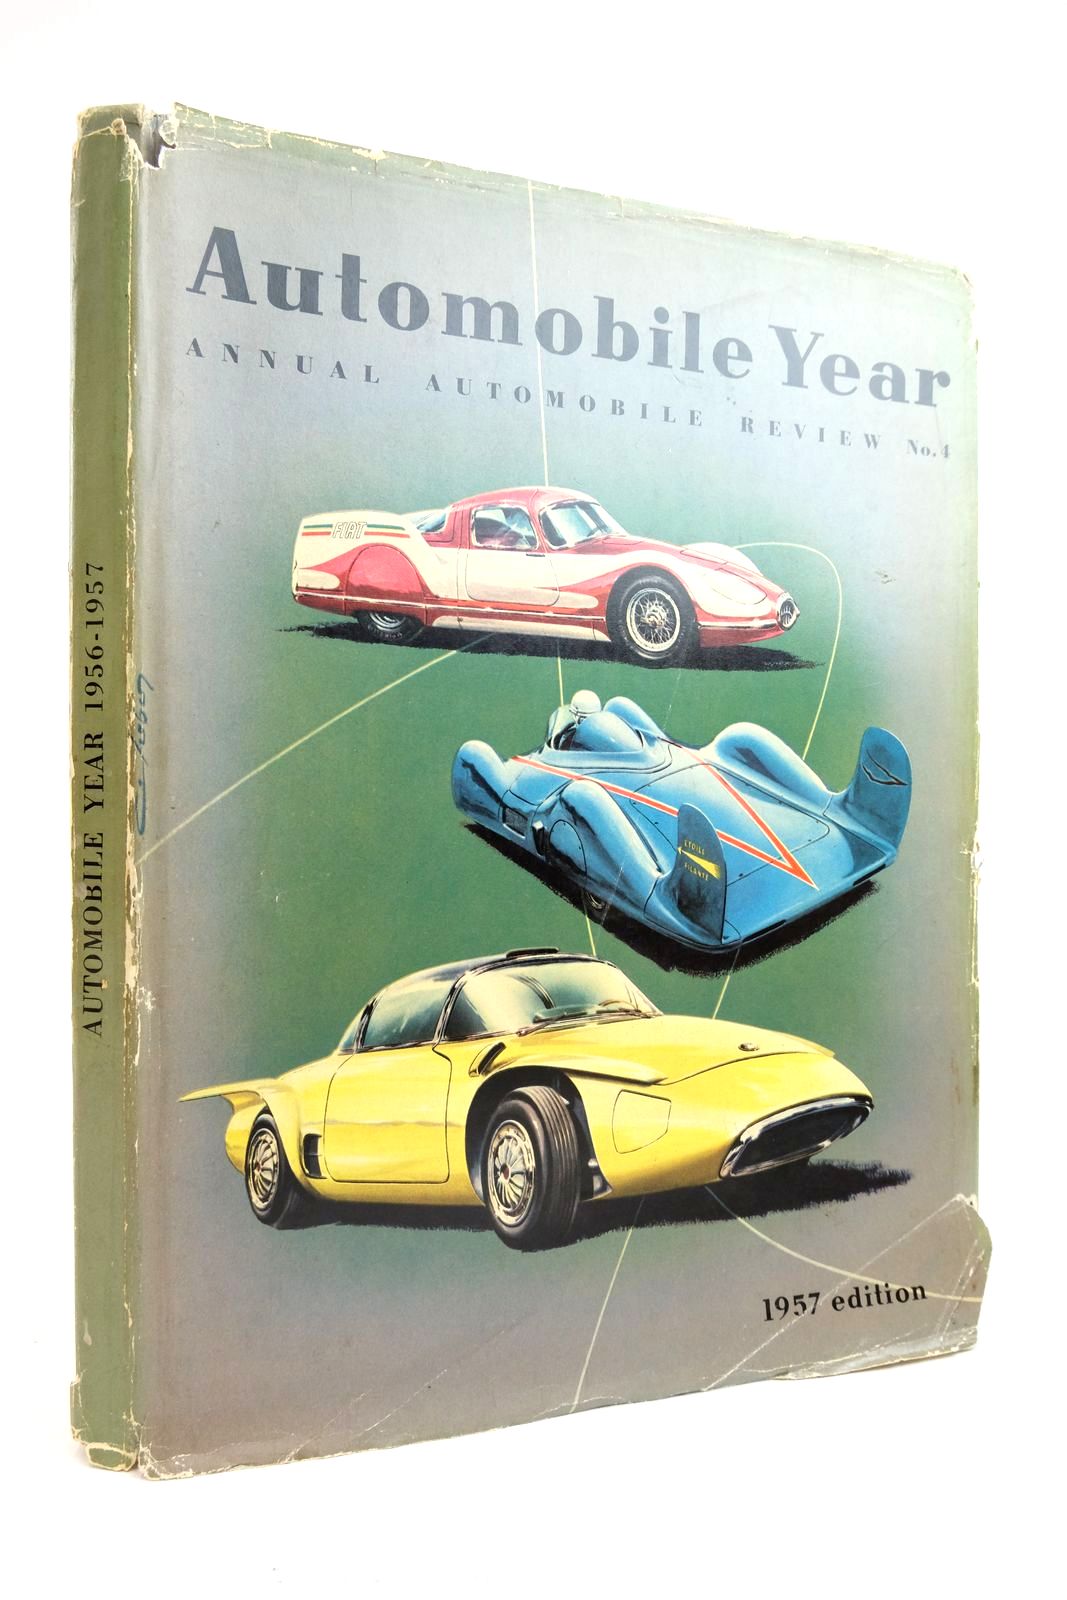 Photo of AUTOMOBILE YEAR 1956-1957 ANNUAL AUTOMOBILE REVIEW No. 4 published by Edita S.A. Lausanne (STOCK CODE: 2135375)  for sale by Stella & Rose's Books